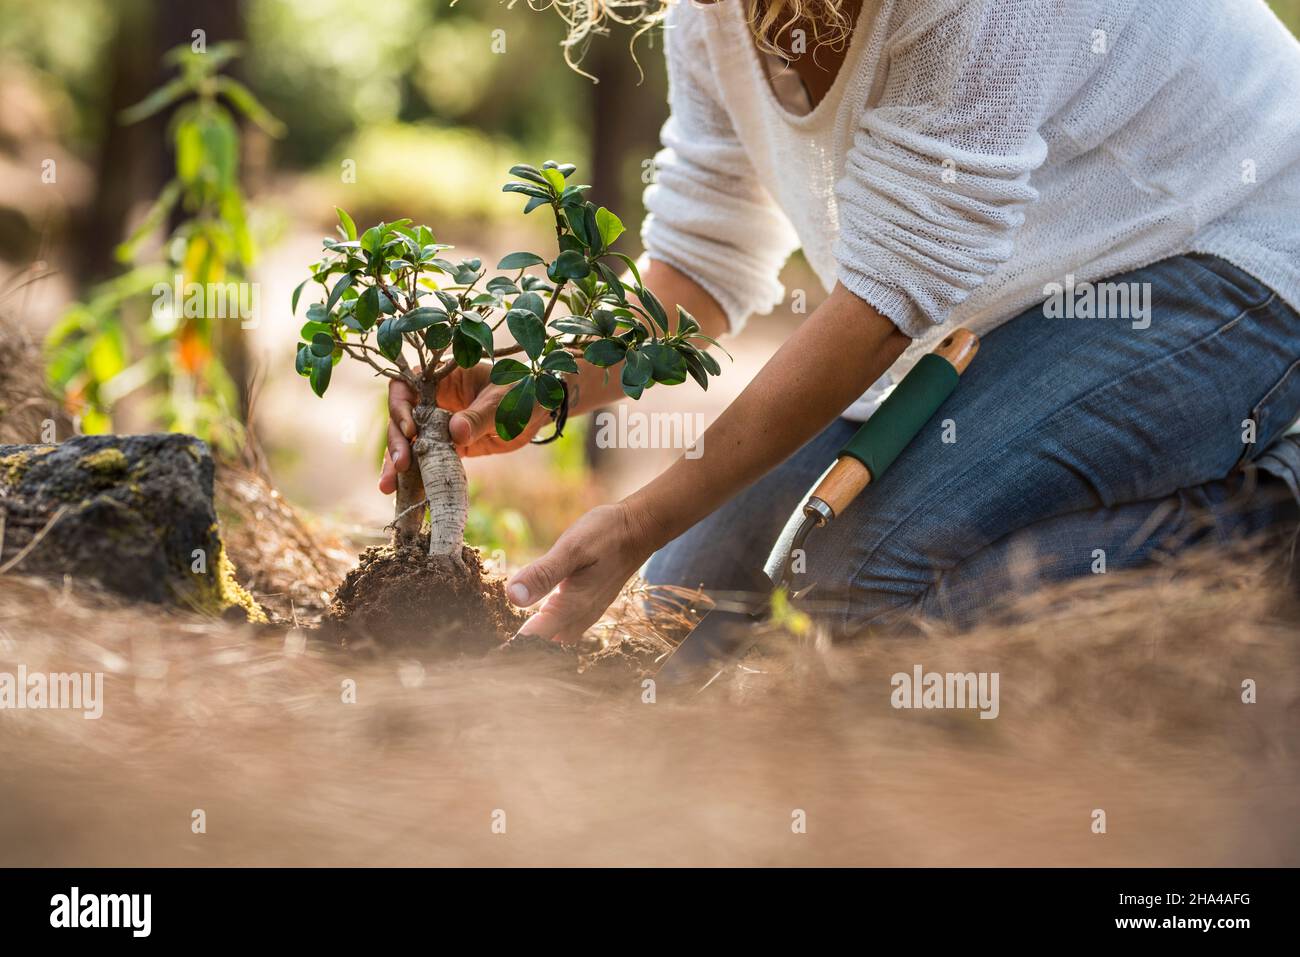 woman planting small seedling plant in soil while kneeling on ground in garden at springtime. hands of woman planting sapling of tree Stock Photo